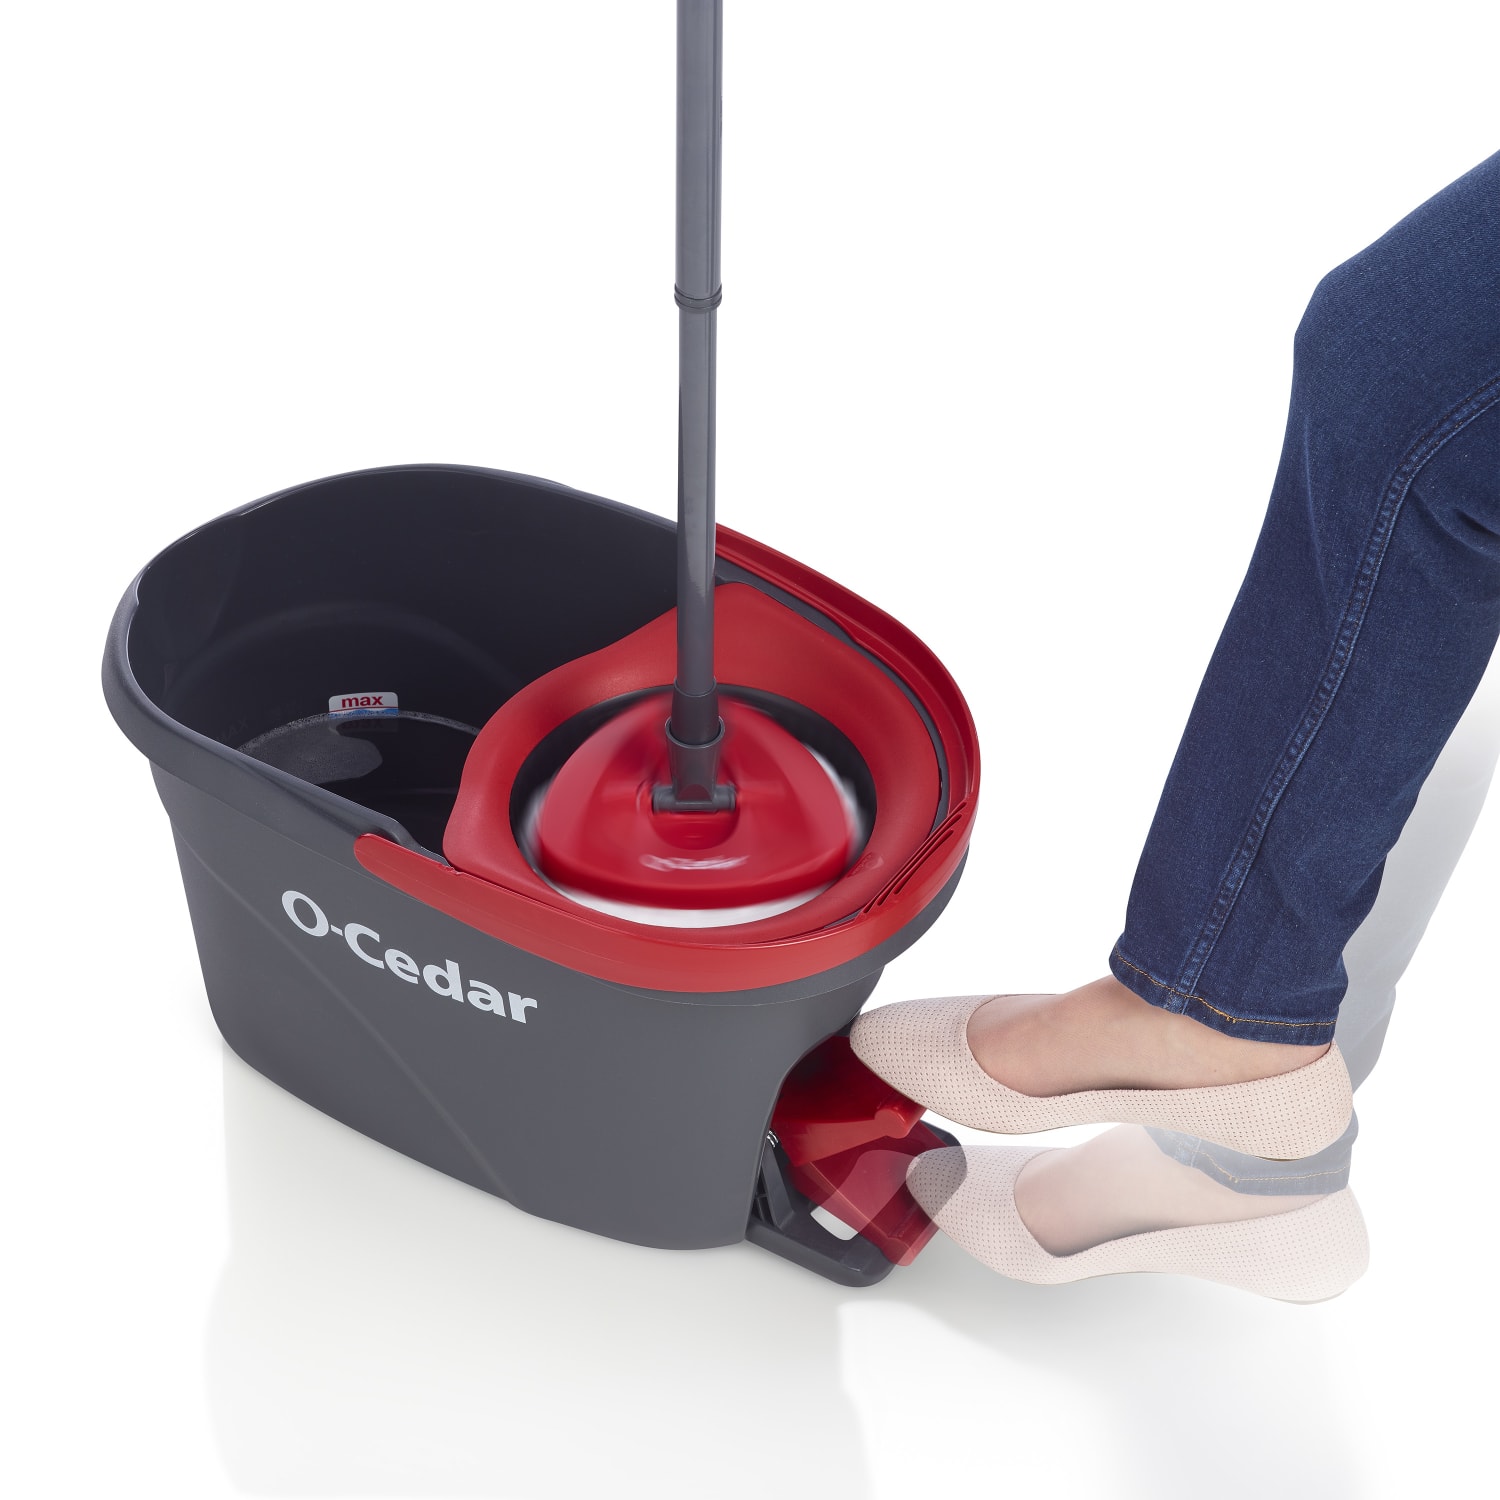 O-Cedar EasyWring Microfiber Spin Mop and Bucket Floor Cleaning System